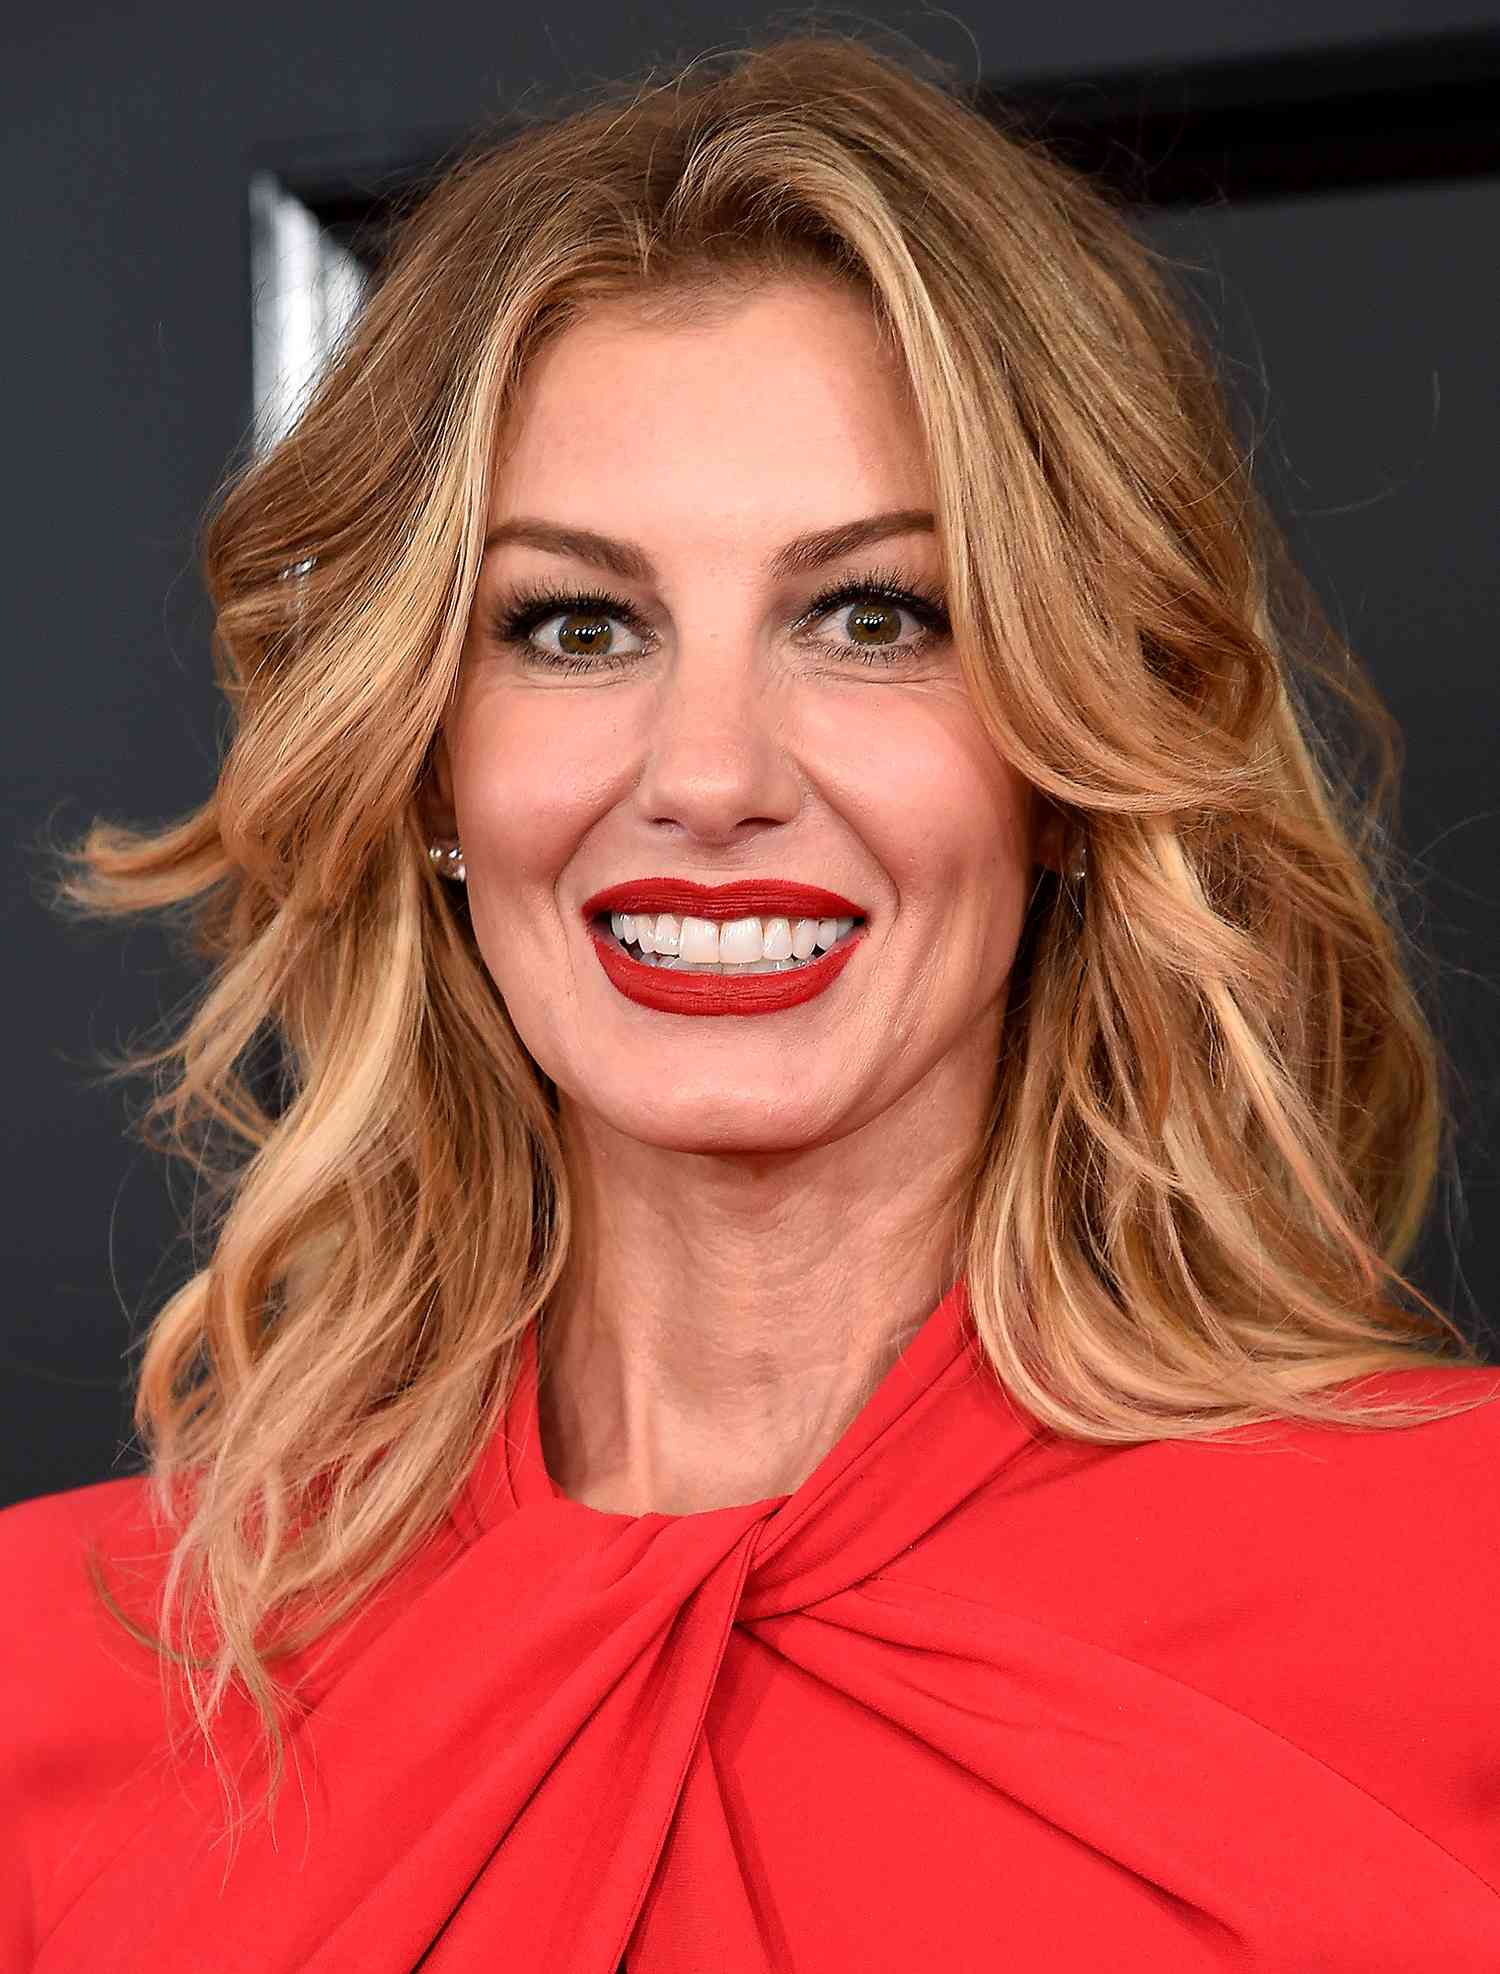 alan vest recommends nude pictures of faith hill pic